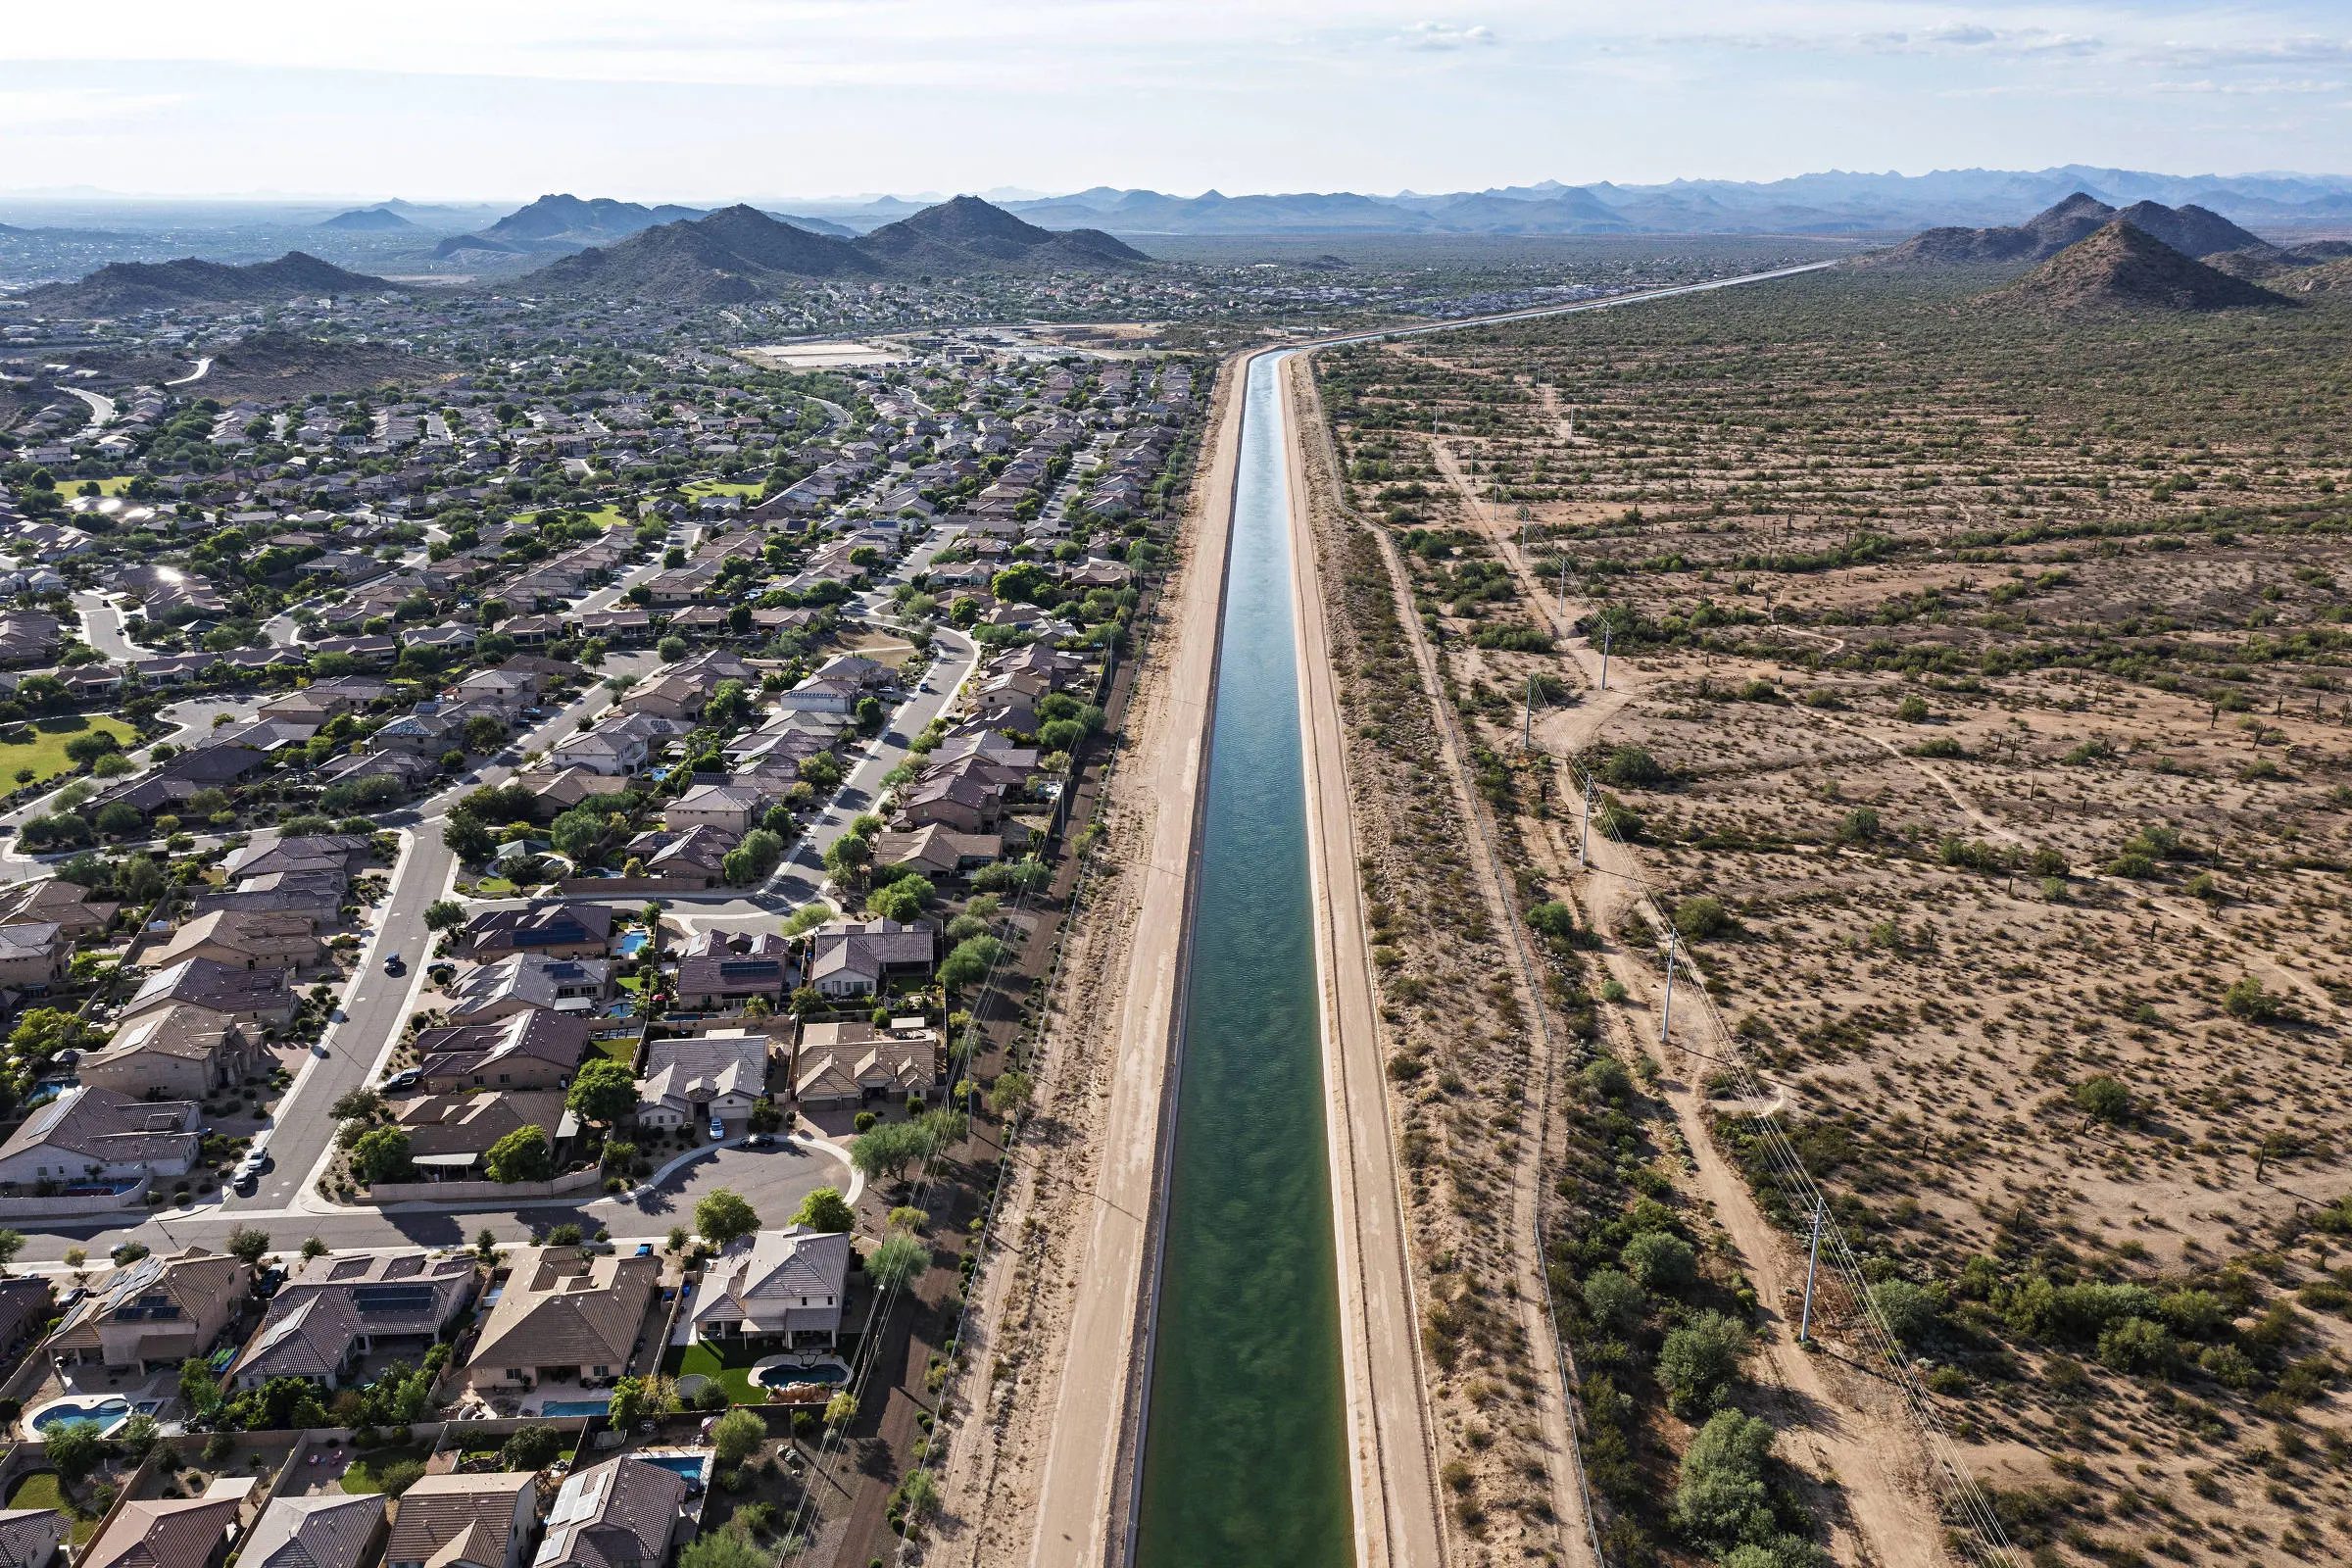 A canal that captures water from the Colorado River